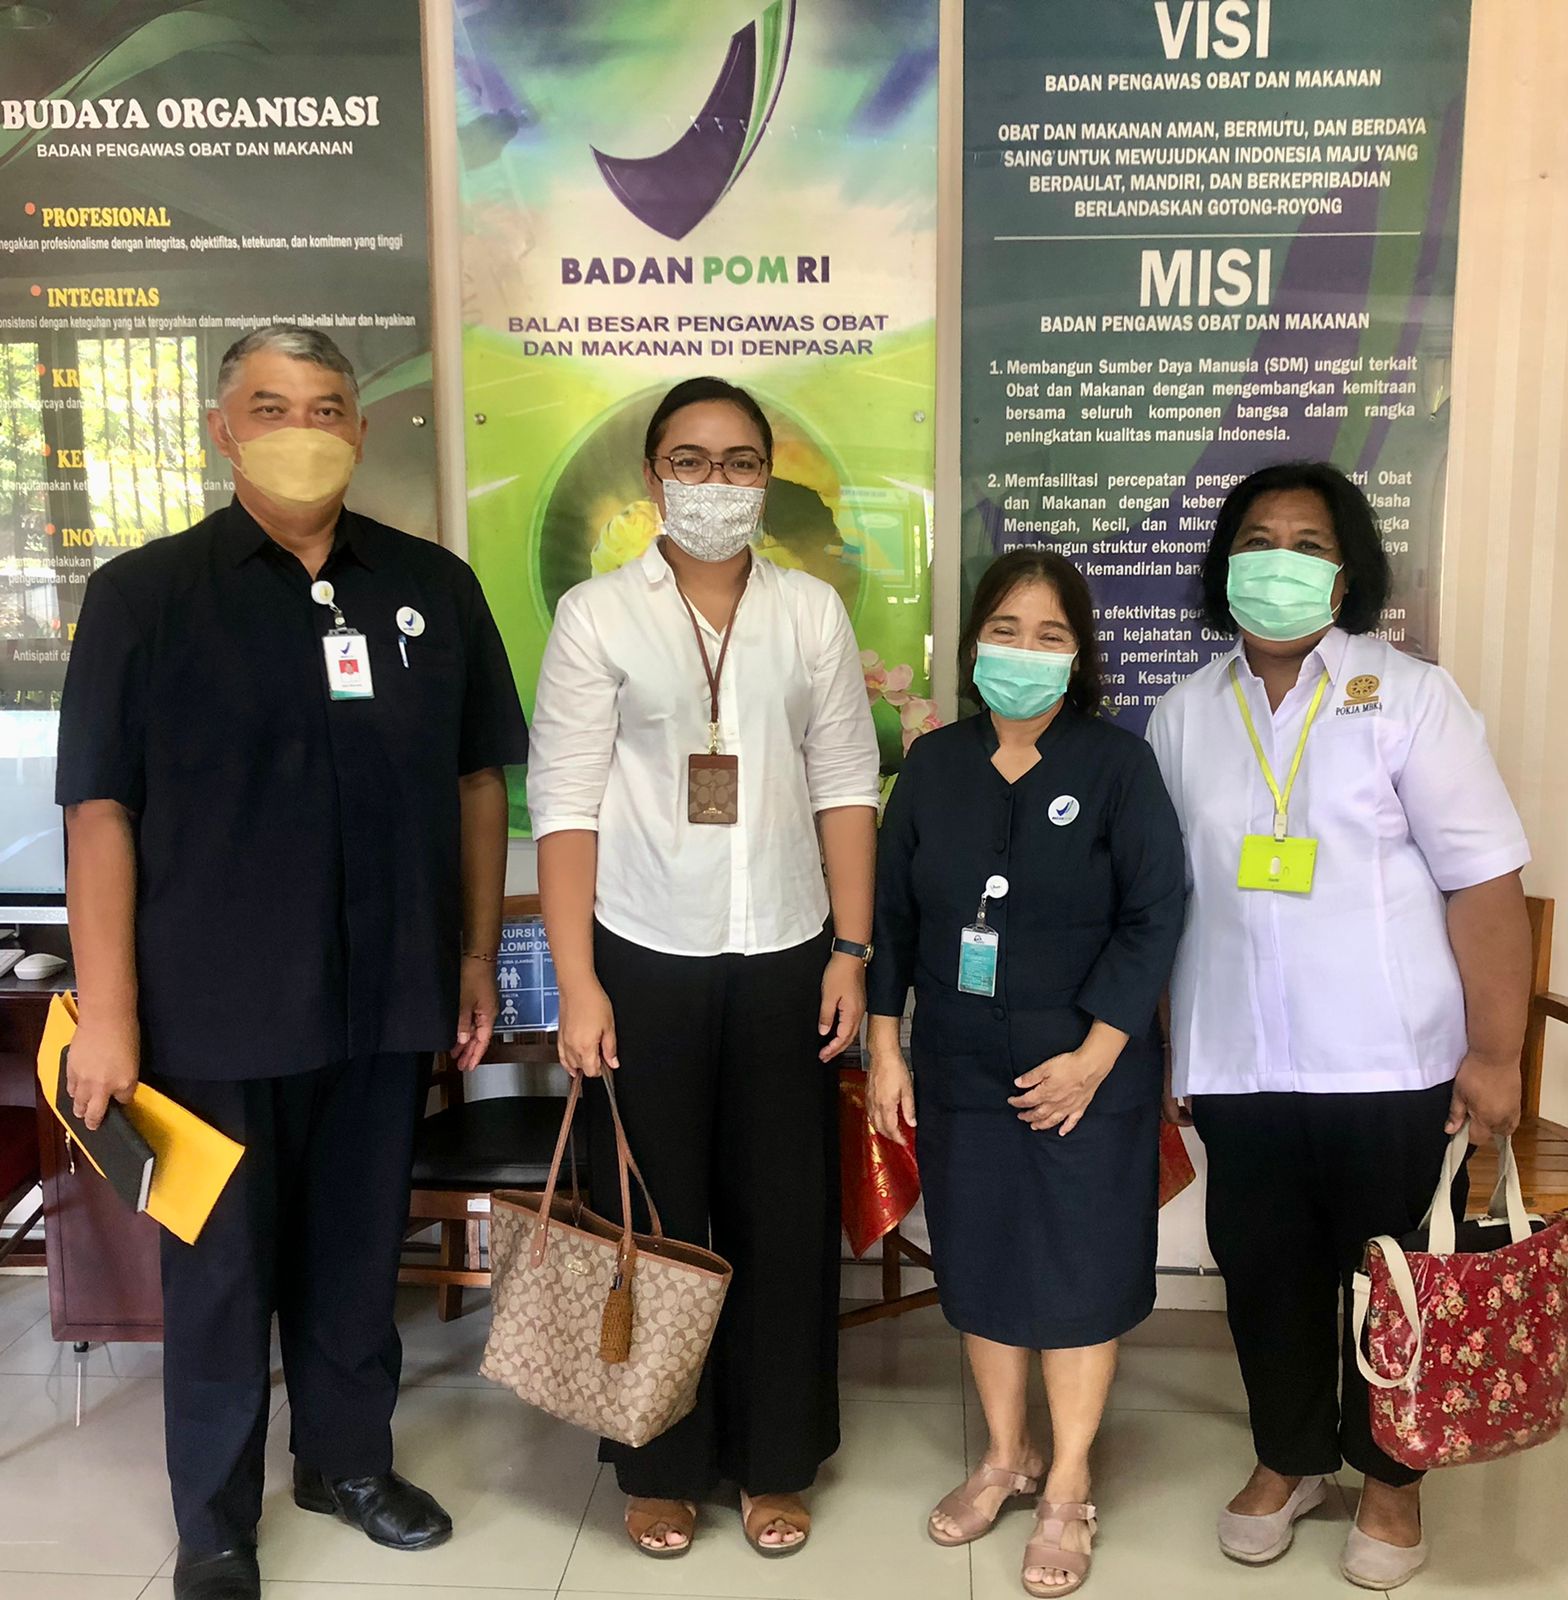 MBKM Internship Preparation: Faculty of Agricultural Technology conducts cooperation exploration with the National Agency of Drug and Food Control (BBPOM) Denpasar